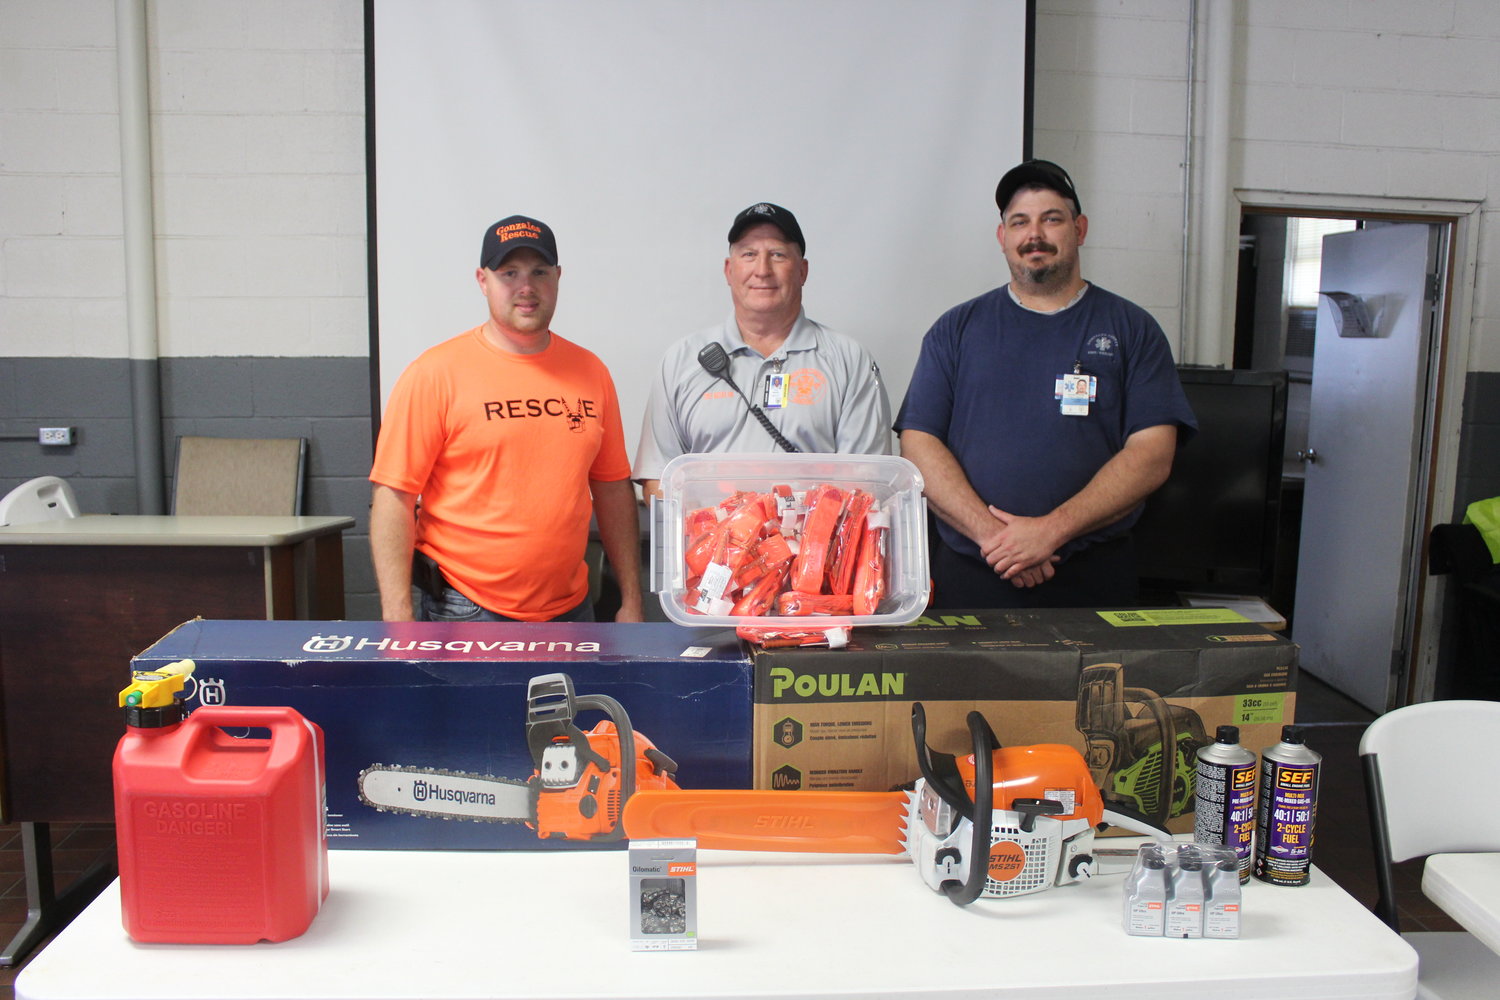 Tony Matias, Ken Colwell and James Cole of Gonzales County Rescue stand behind the new chain saws and tourniquets that were donated by area businesses to help support Rescue.